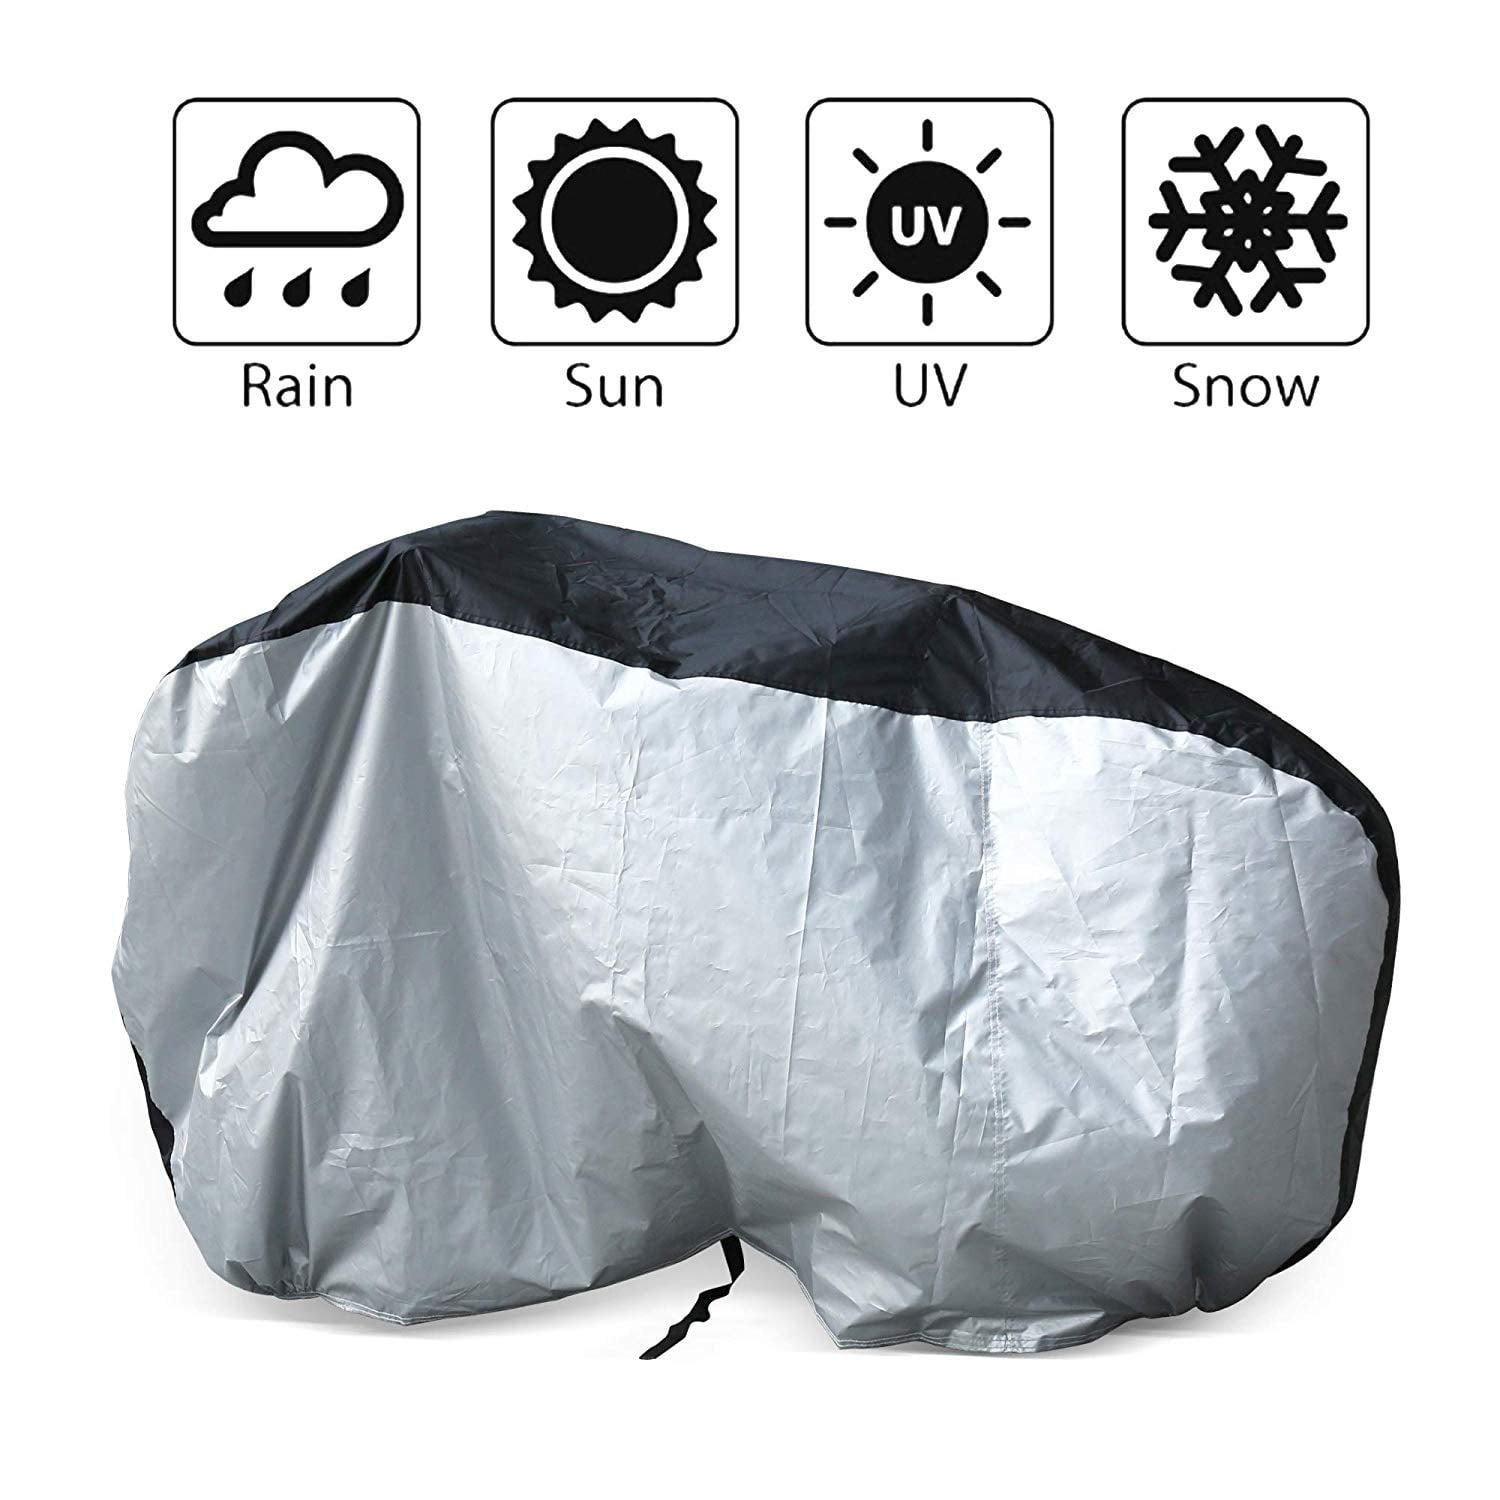 MarLine Bike Cover Outdoor Waterproof Bicycle Cover Dust Snow Proof with Lock Hole and Reflective Straps